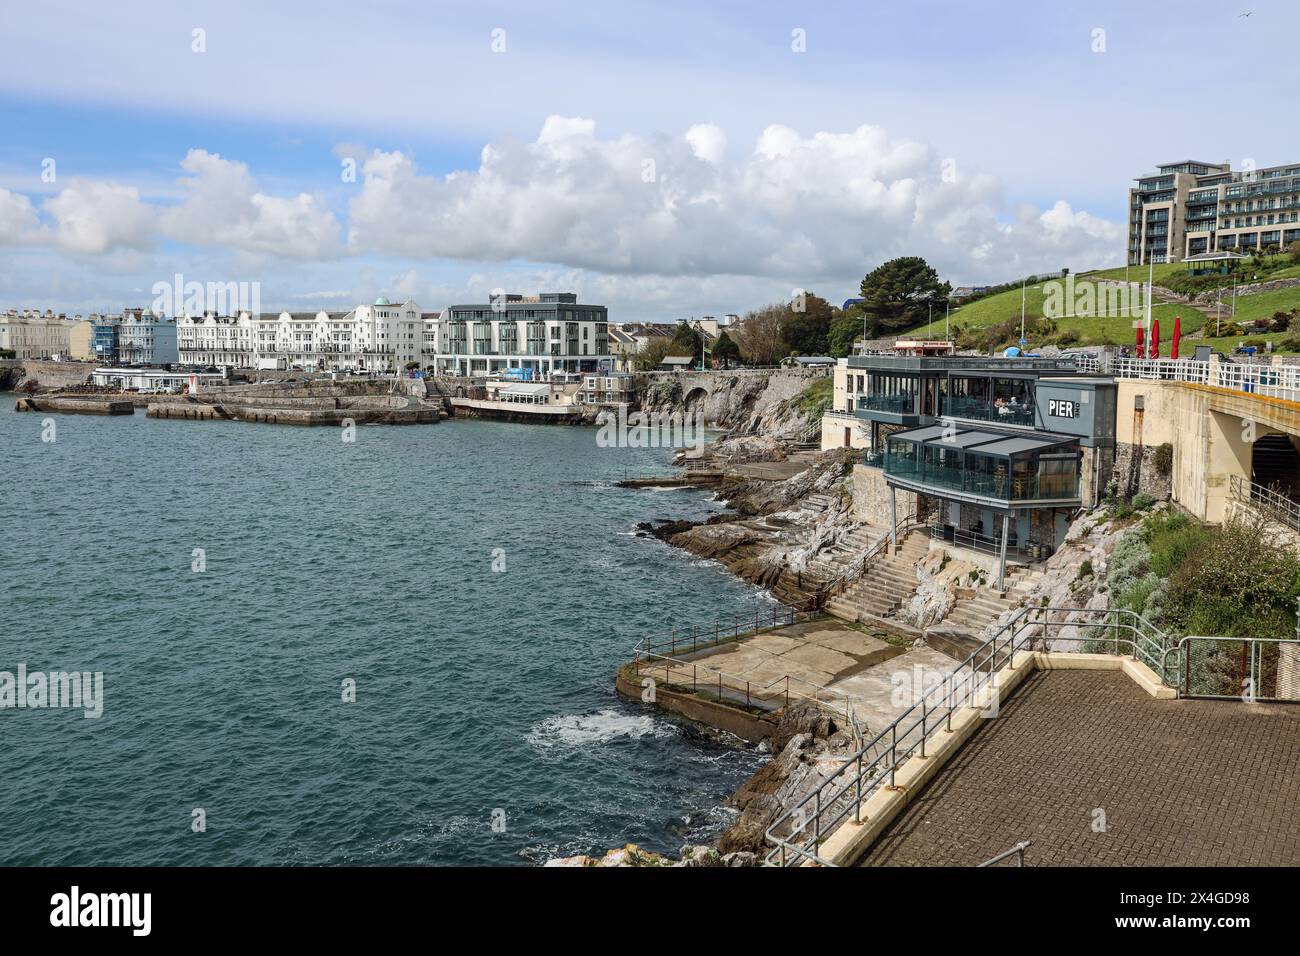 The busy waterfront at West Hoe in Plymouth ready to welcome drinkers and diners. Luxury apartments take advantage of the execeptional views of Plymou Stock Photo